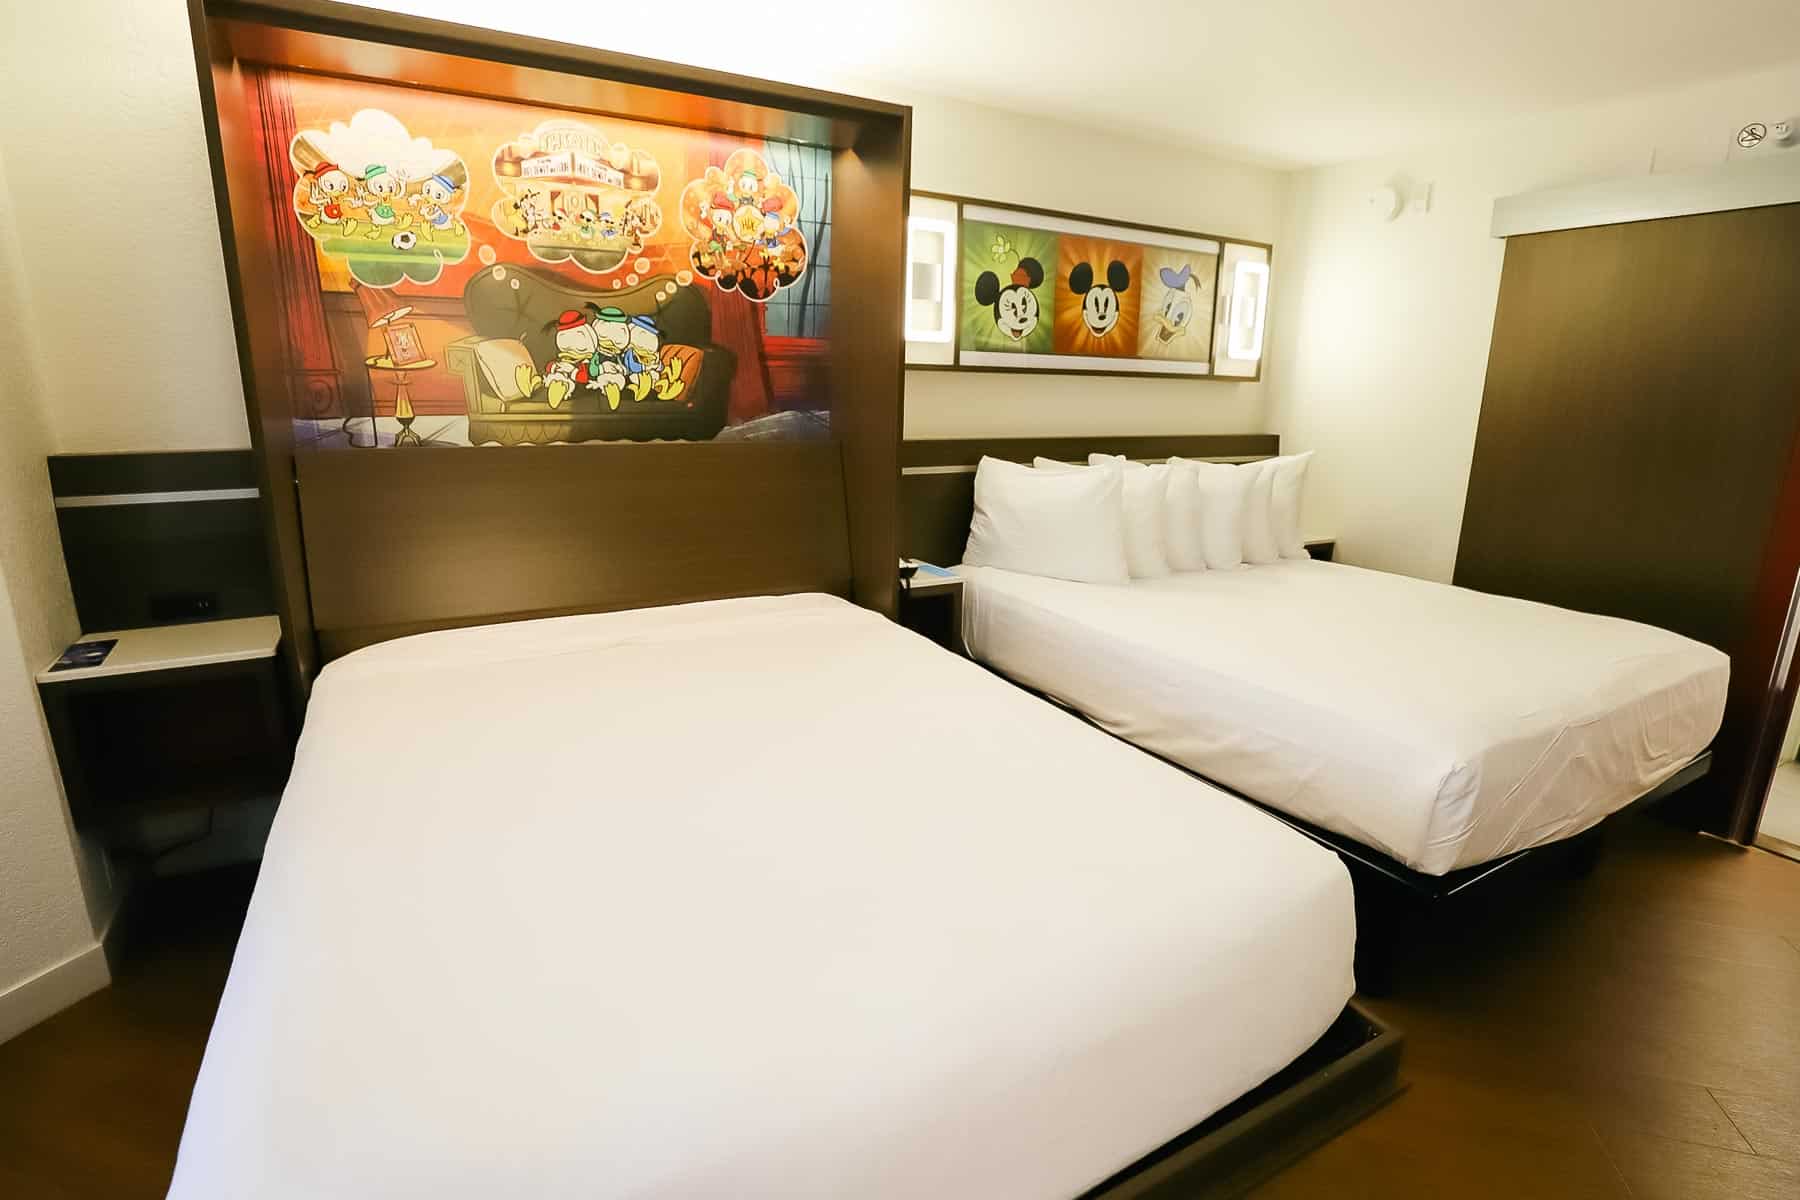 A standard guest room at Disney's All-Star Music has two queen size beds. 